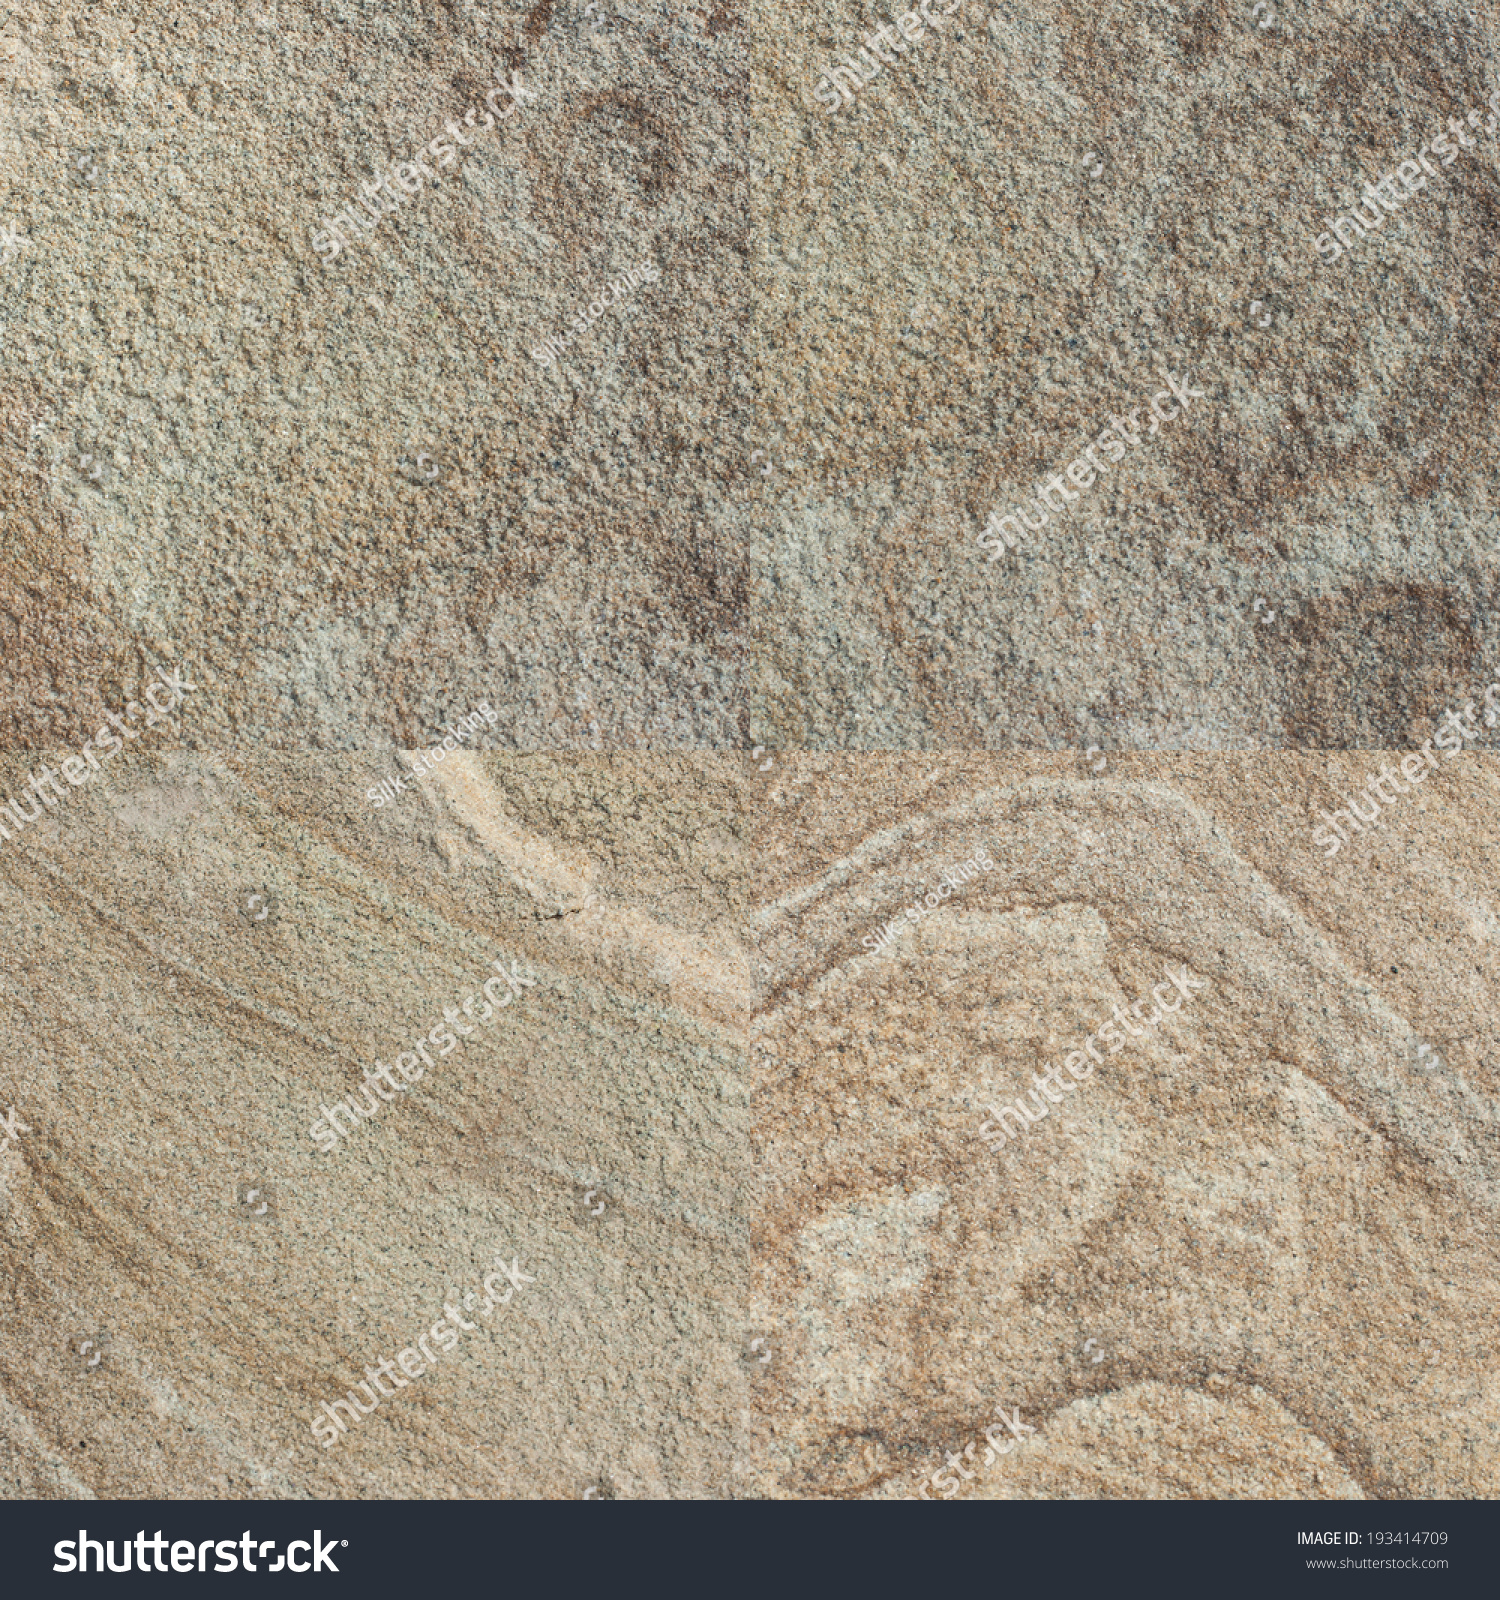 Set Four Stone Surface Texture High Stock Photo 193414709 - Shutterstock